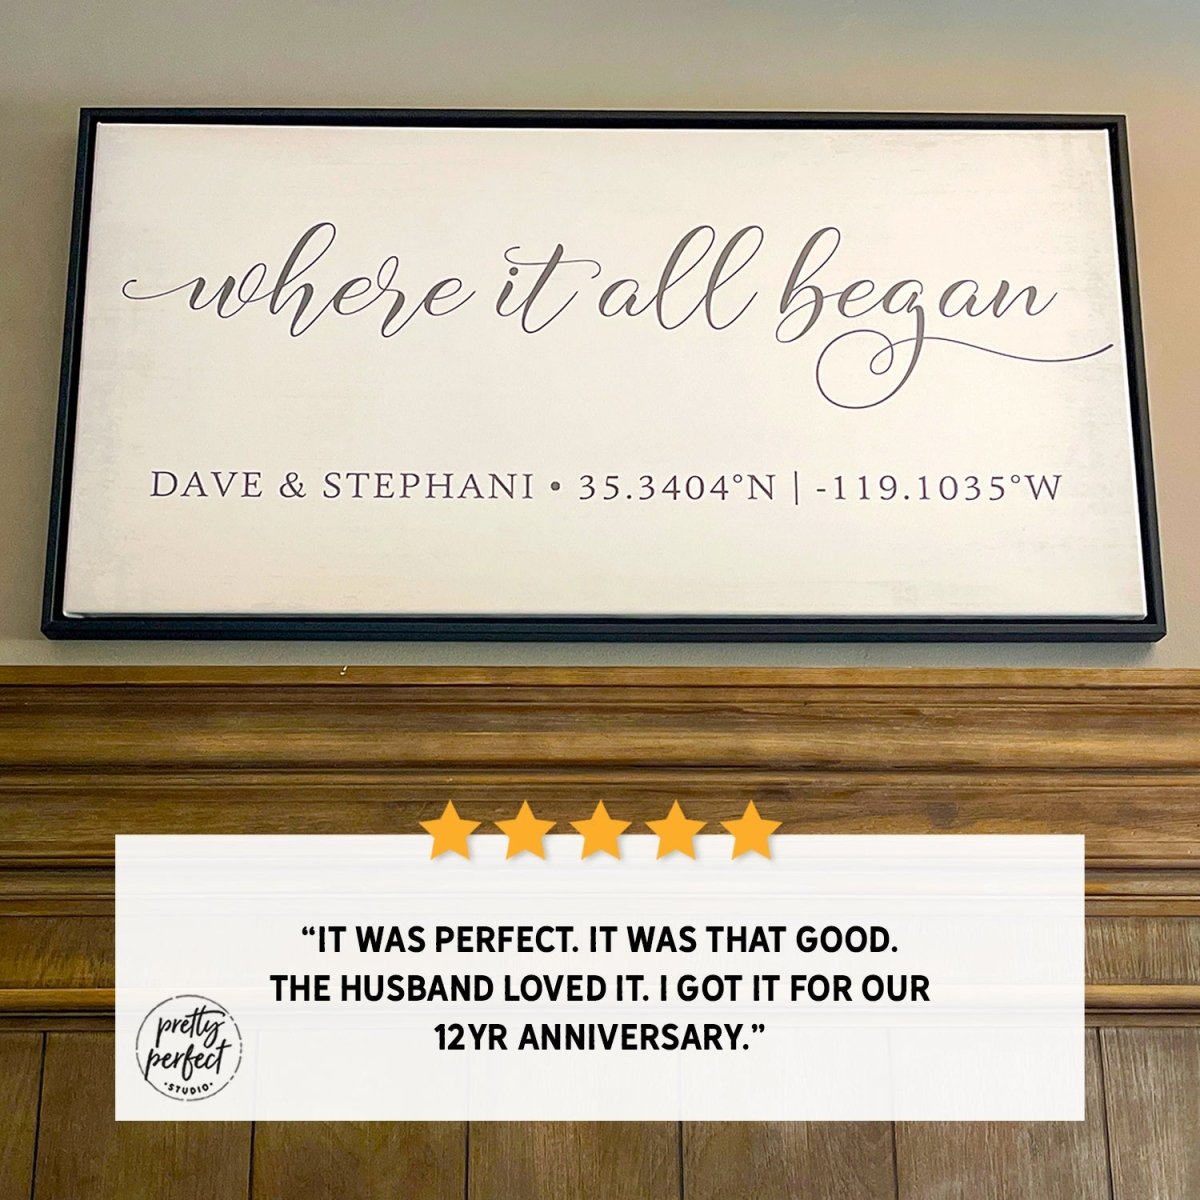 Customer product review for personalized where it all began sign by Pretty Perfect Studio